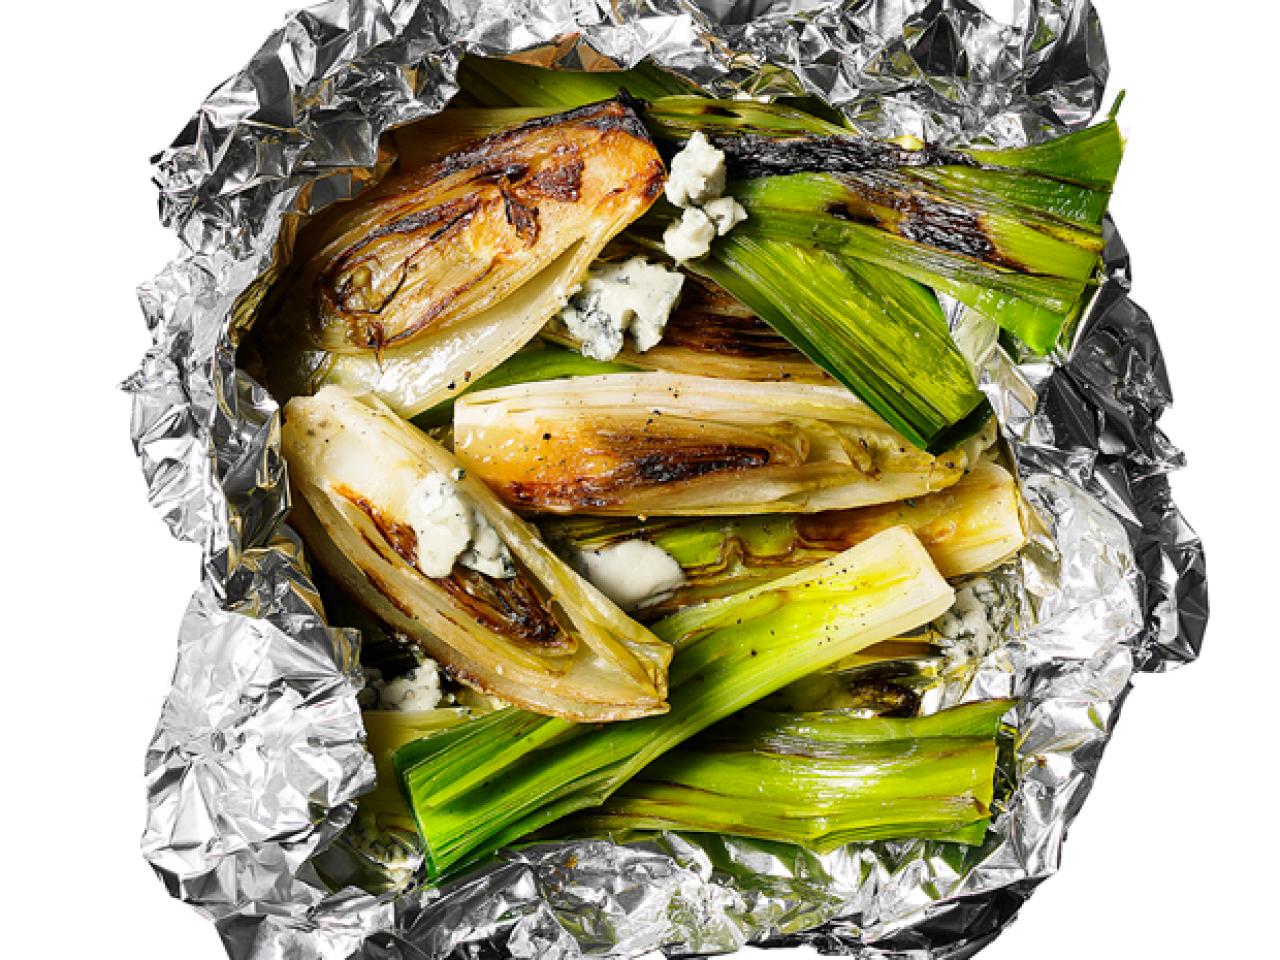 Foil Packs for the Grill : Recipes and Cooking : Food Network, Recipes,  Dinners and Easy Meal Ideas